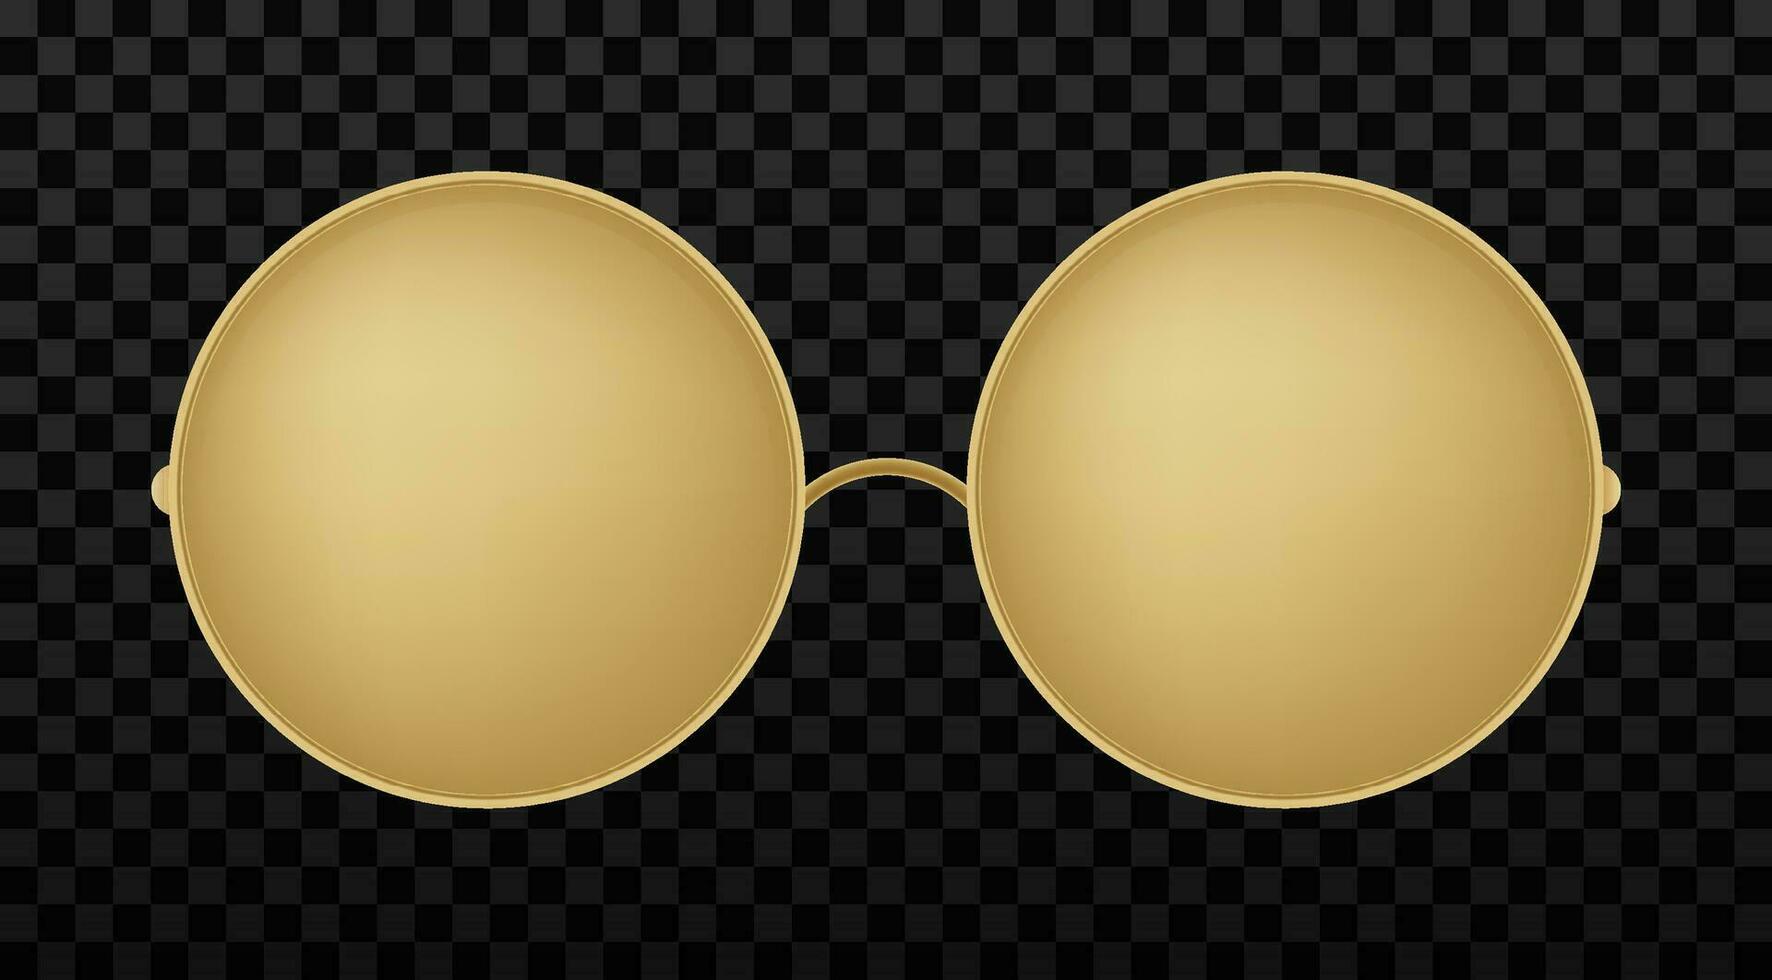 Gold round sunglasses with gold frame. Sun glasses with gradient lenses vector illustration